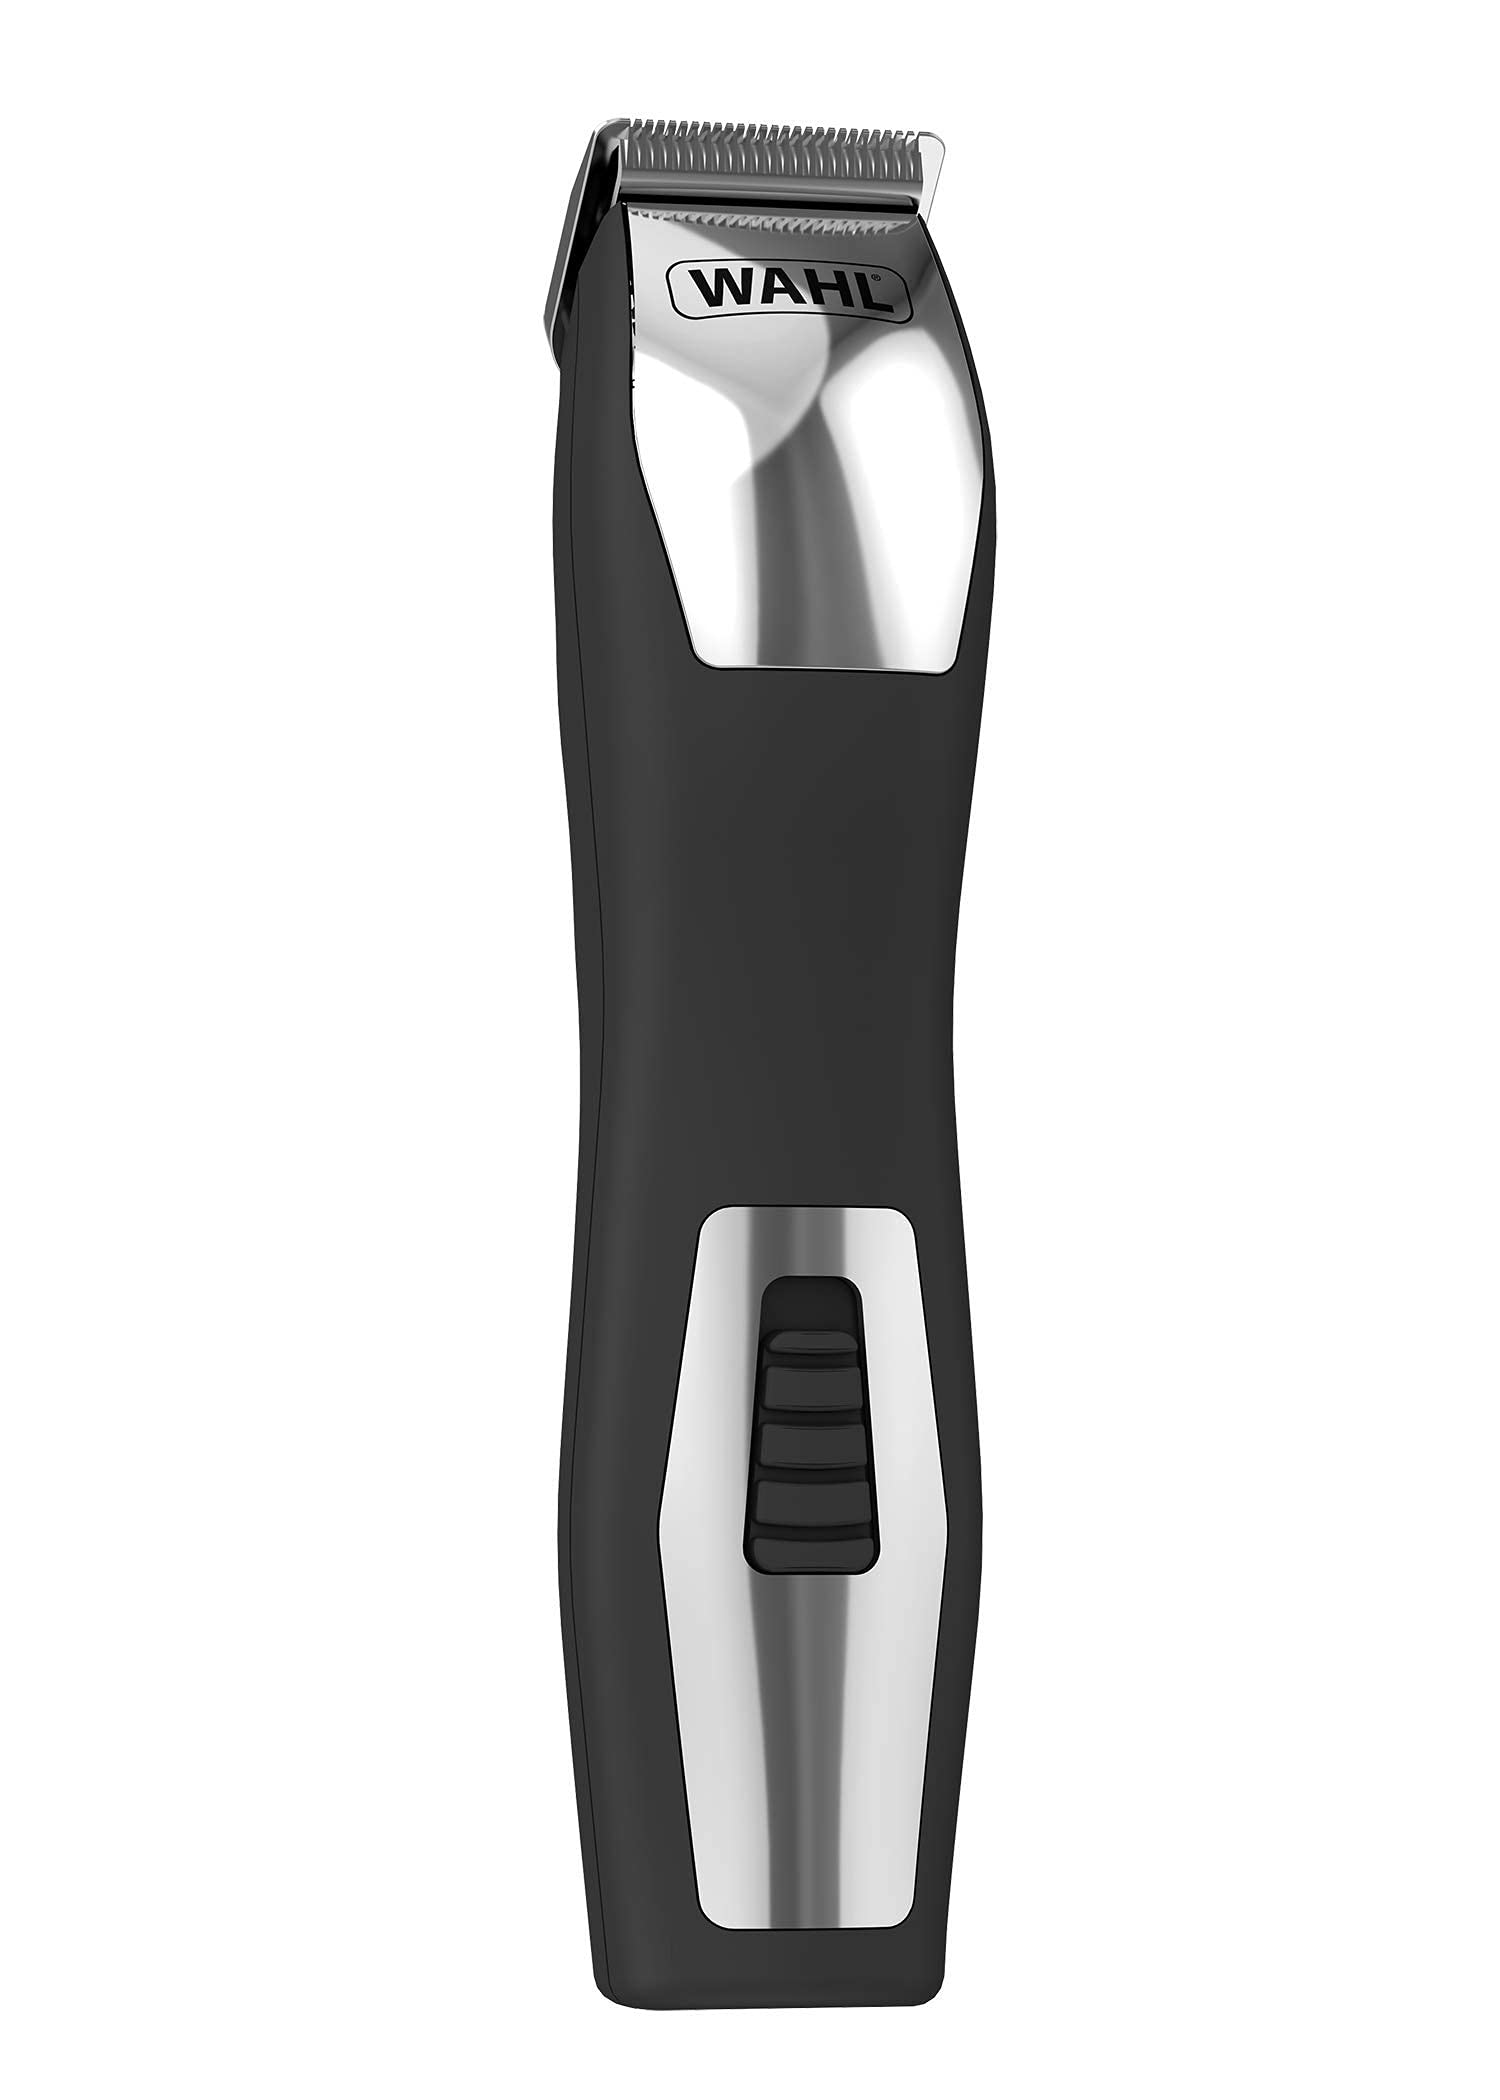 WAHL Groomsman Pro Rechargeable Grooming Kit, Multi grooming, Beard and Body Trimmer, 9 different cutting lengths beard trimmer for men, Black/Silver, 09855-1227 